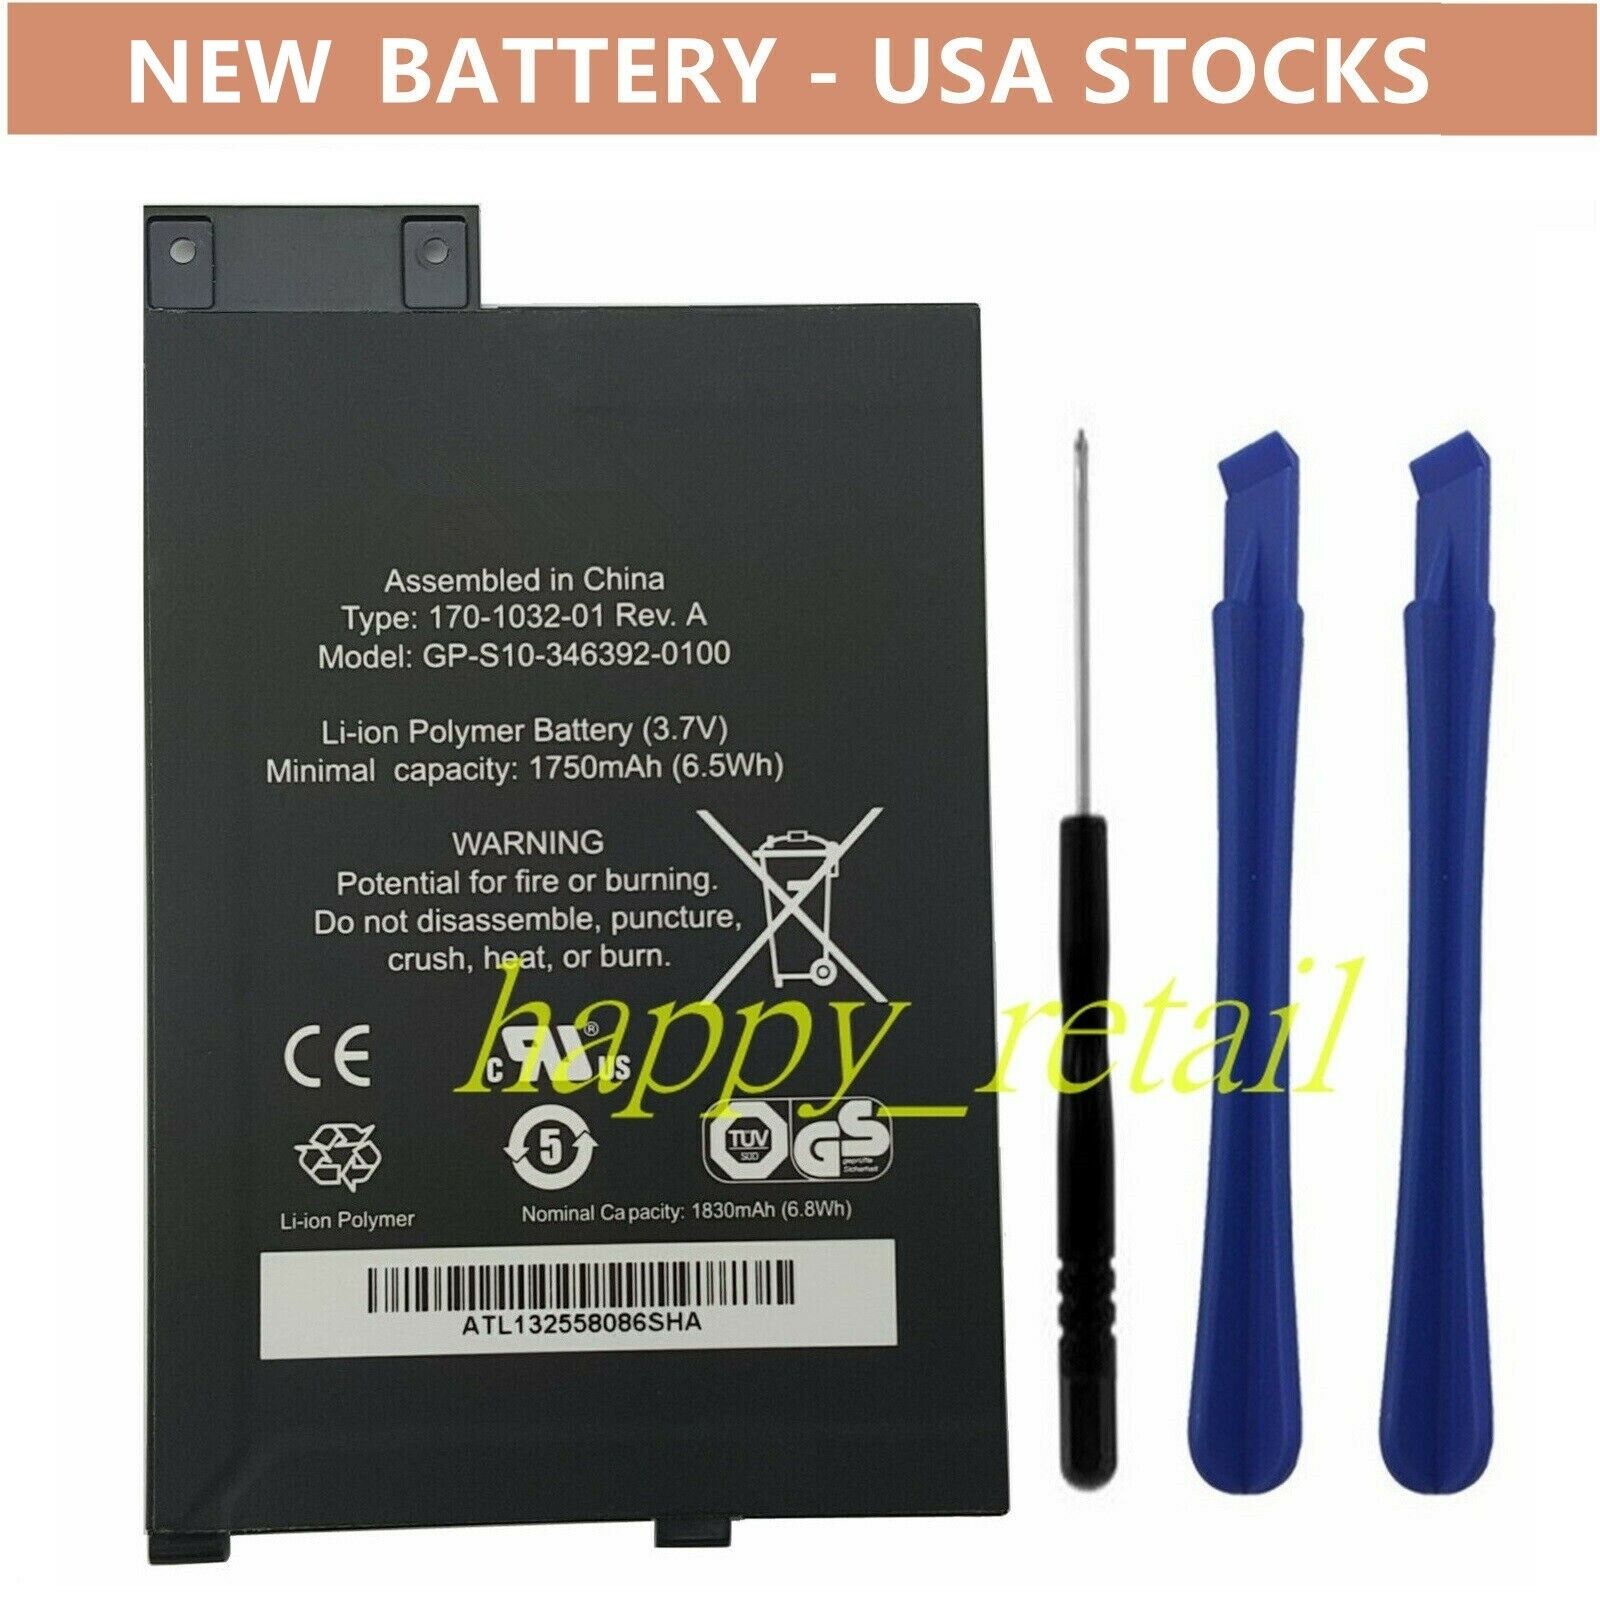 New Battery 170-1032-00 For Amazon Kindle Keyboard 3rd Gen D00901 Graphite